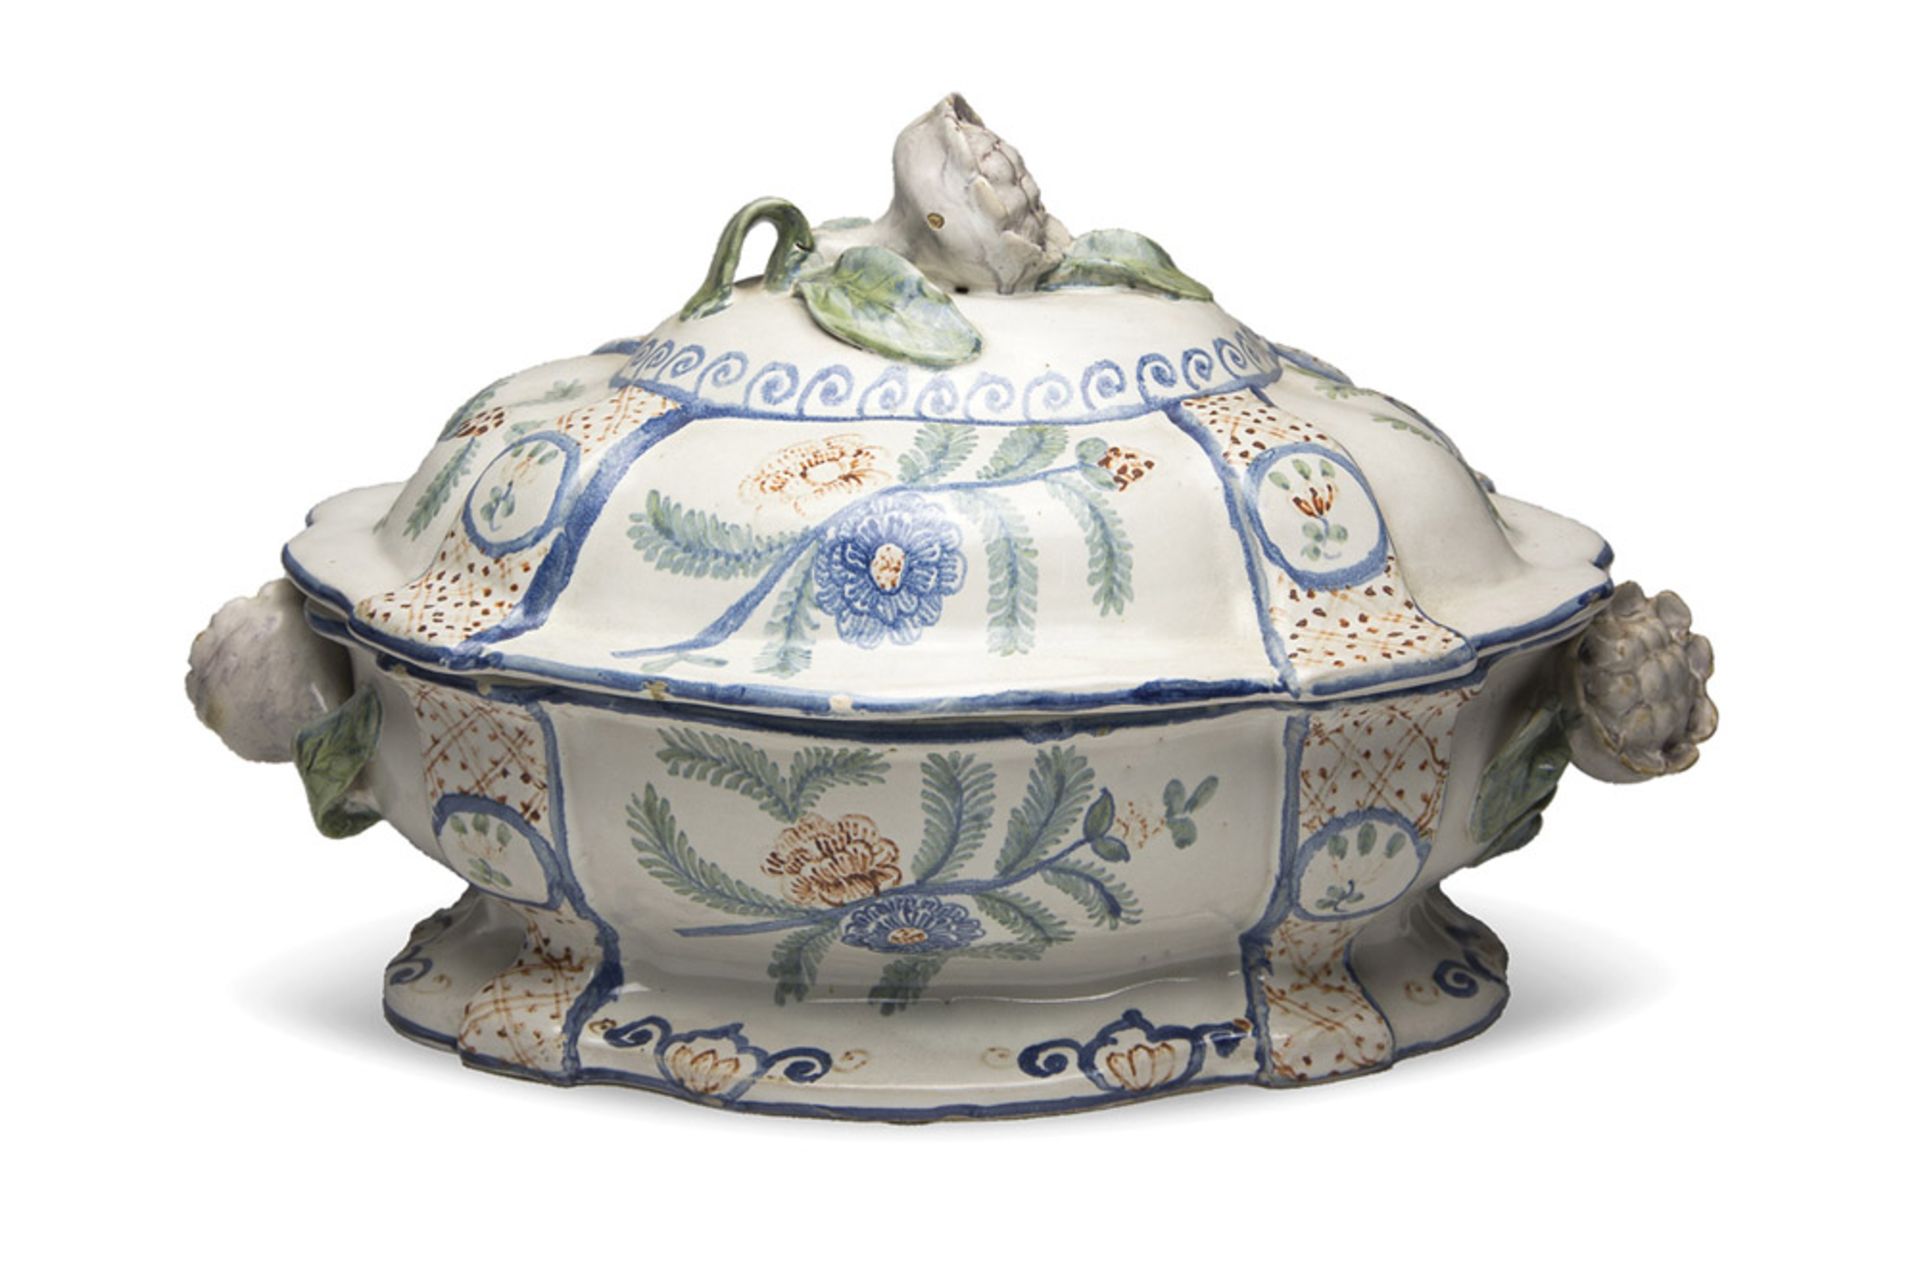 BEAUTIFUL MAJOLICA TUREEN, PROBABLY FRANCE, LATE 18TH CENTURY